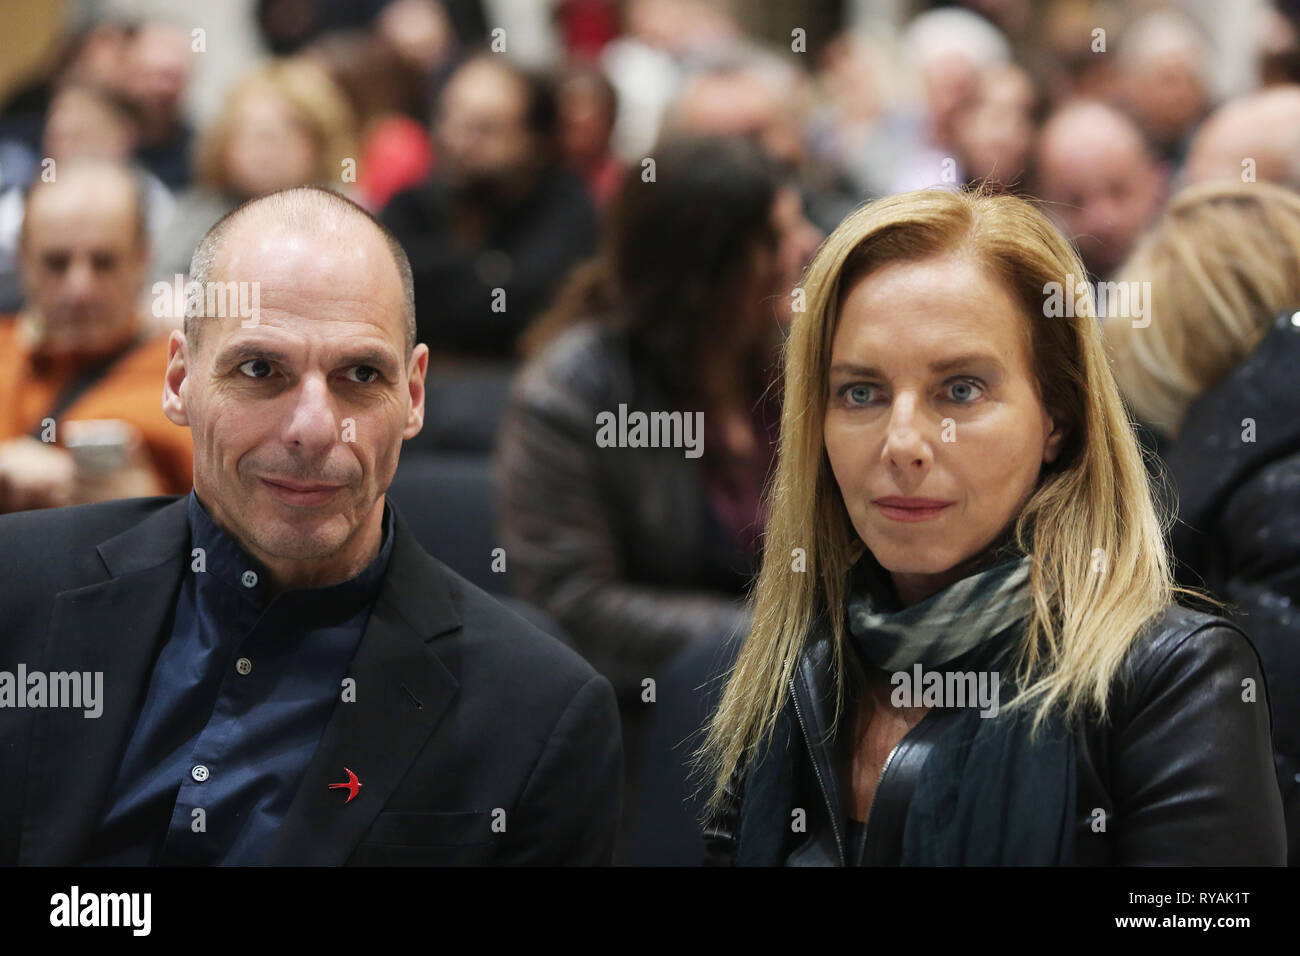 Thessaloniki, Greece. 12th Mar, 2019. Yanis Varoufakis and his wife Danae Stratou during a pre-European Elections event. Greek Economist Yanis Varoufakis visited Thessaloniki during a pre-European election event organised by the party DiEM25. On the 25th of November 2018 Varoufakis was selected to head the list of Democracy in Europe for the 2019 European elections. Credit: Giannis Papanikos/ZUMA Wire/Alamy Live News Stock Photo